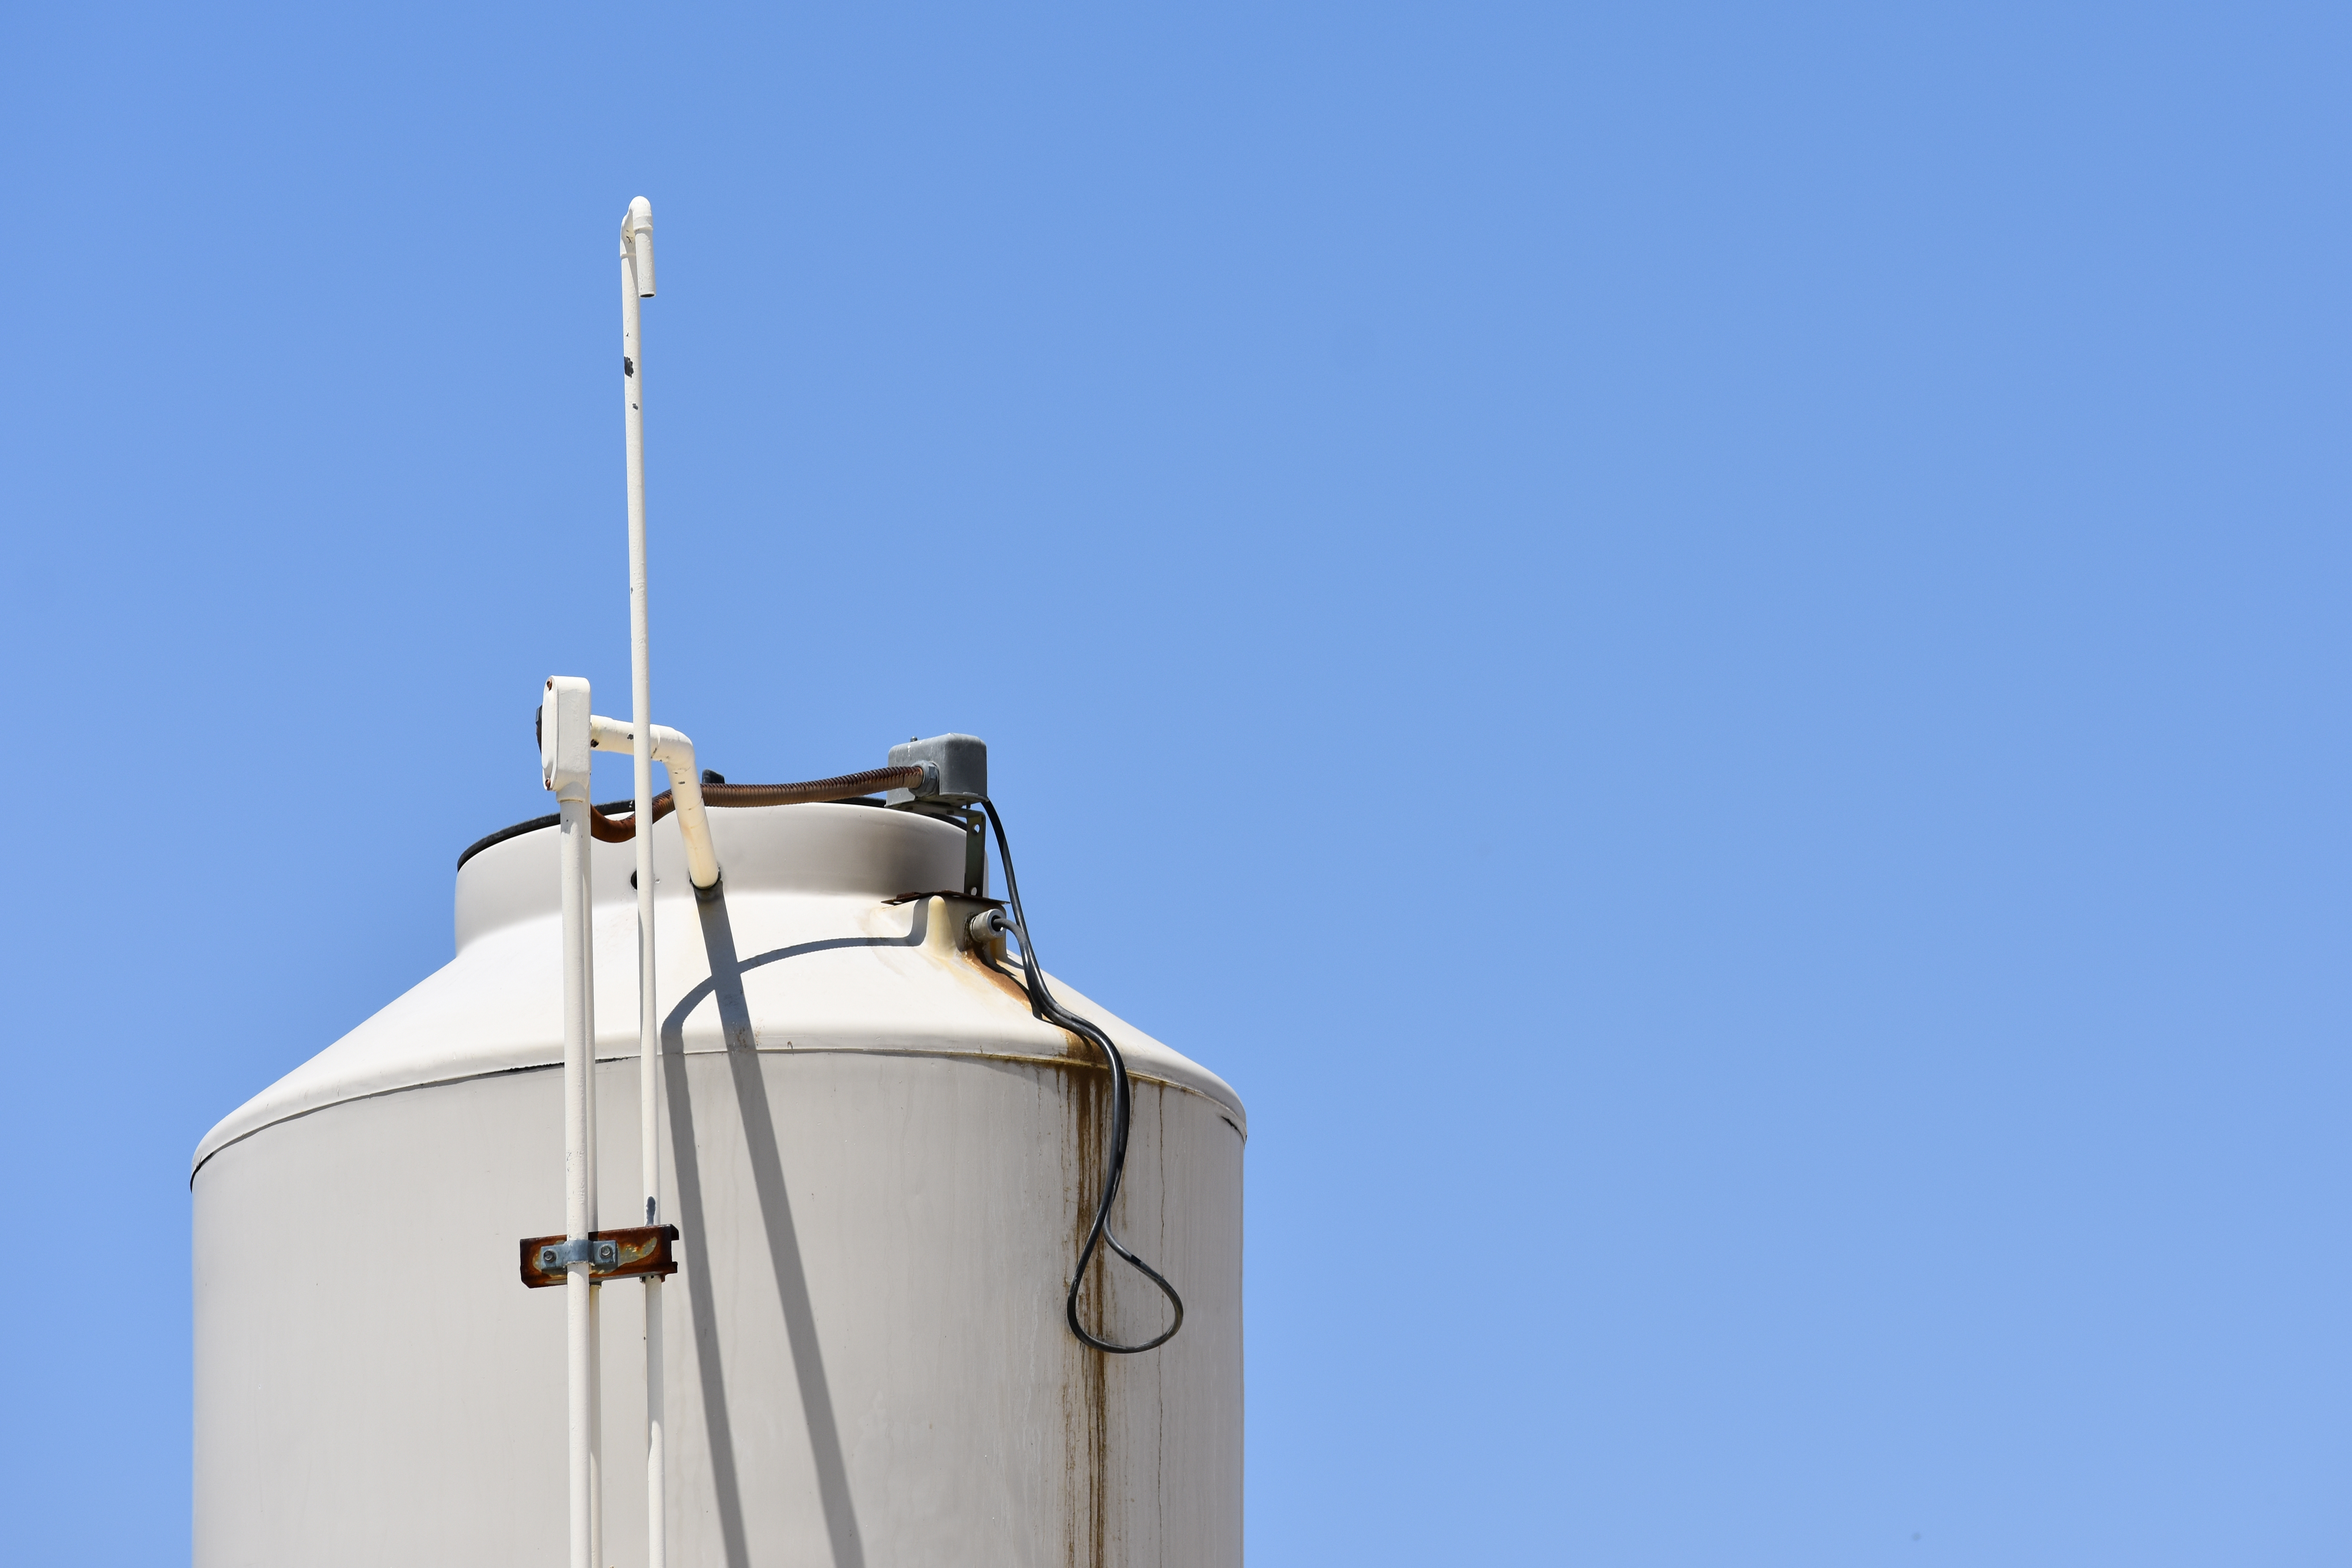 Blue sky featuring the top of a water storage tank